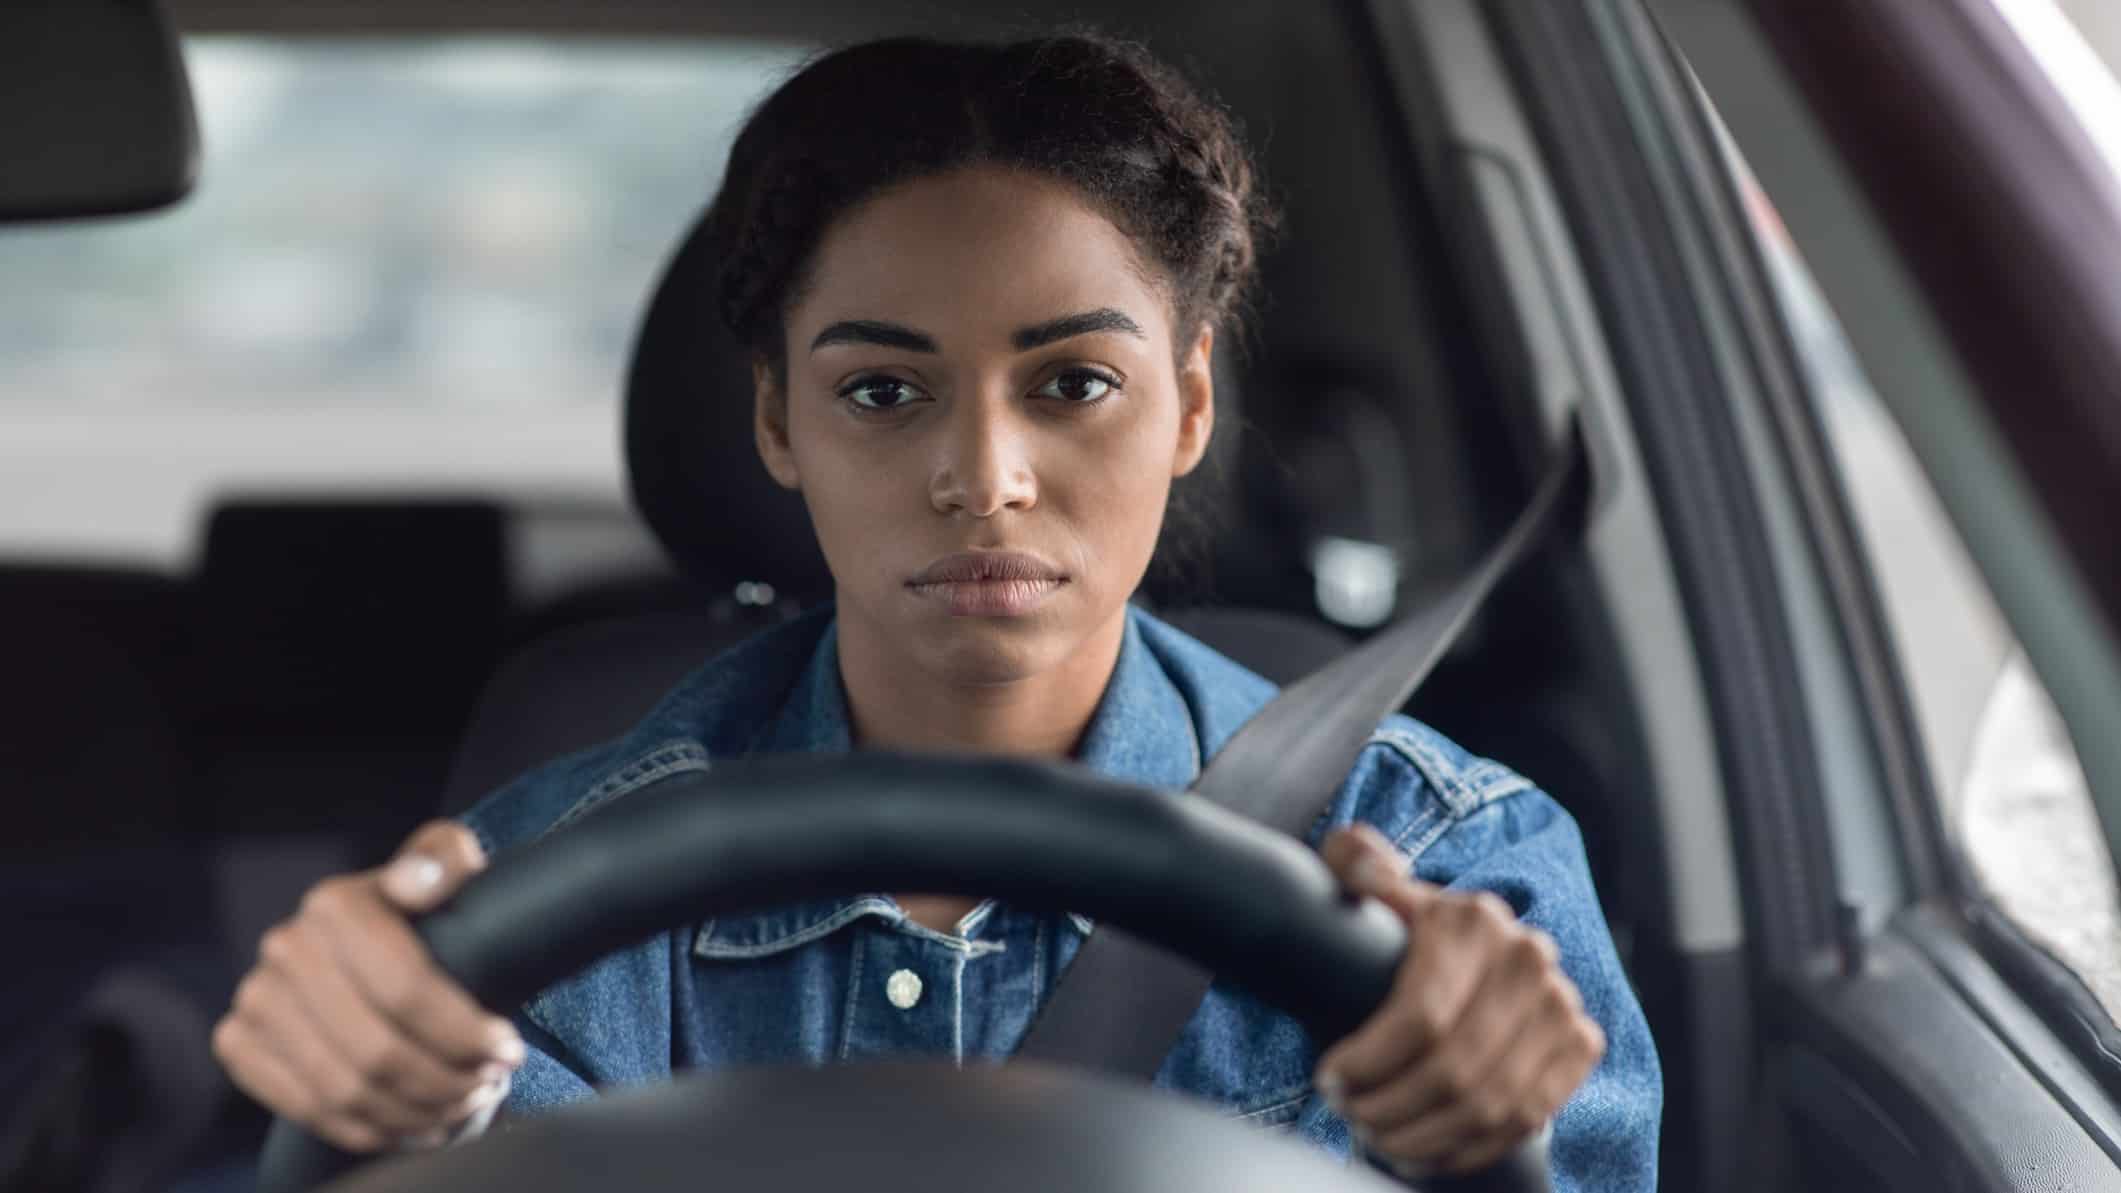 A woman sits miserable behind the wheel of her car.